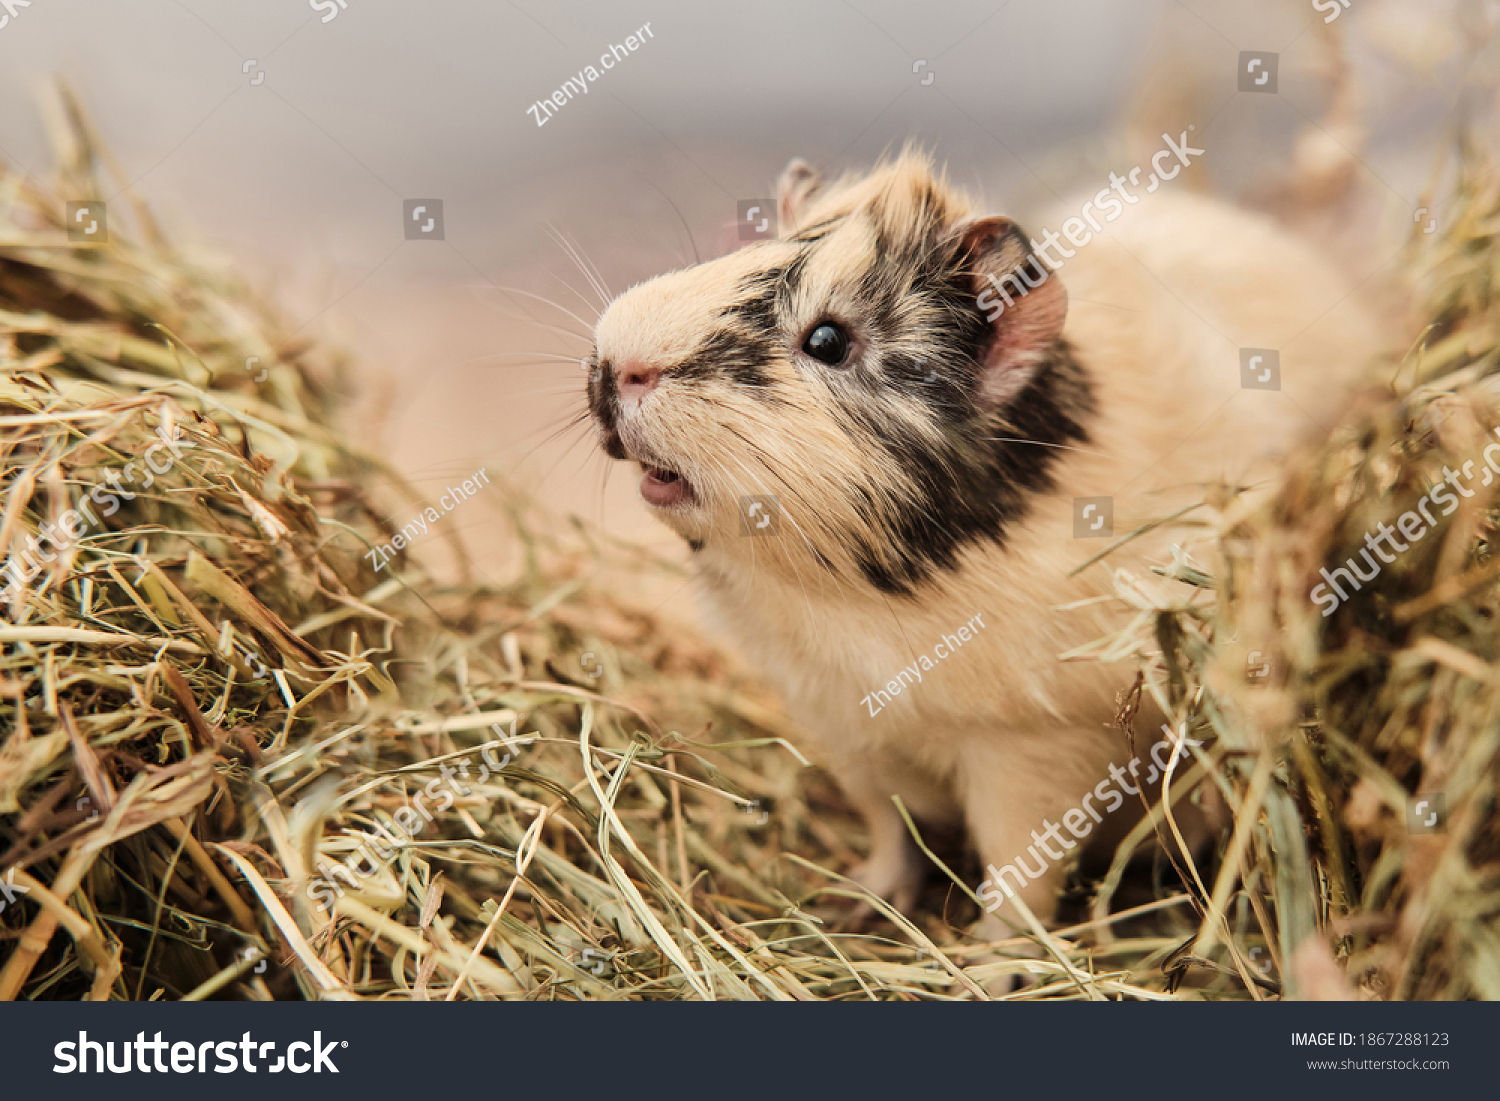 Guinea pig Cavia porcellus is a popular pet. The rodent sits among the hay and eats grass. Guinea pig studio portrait, animal care concept. #1867288123